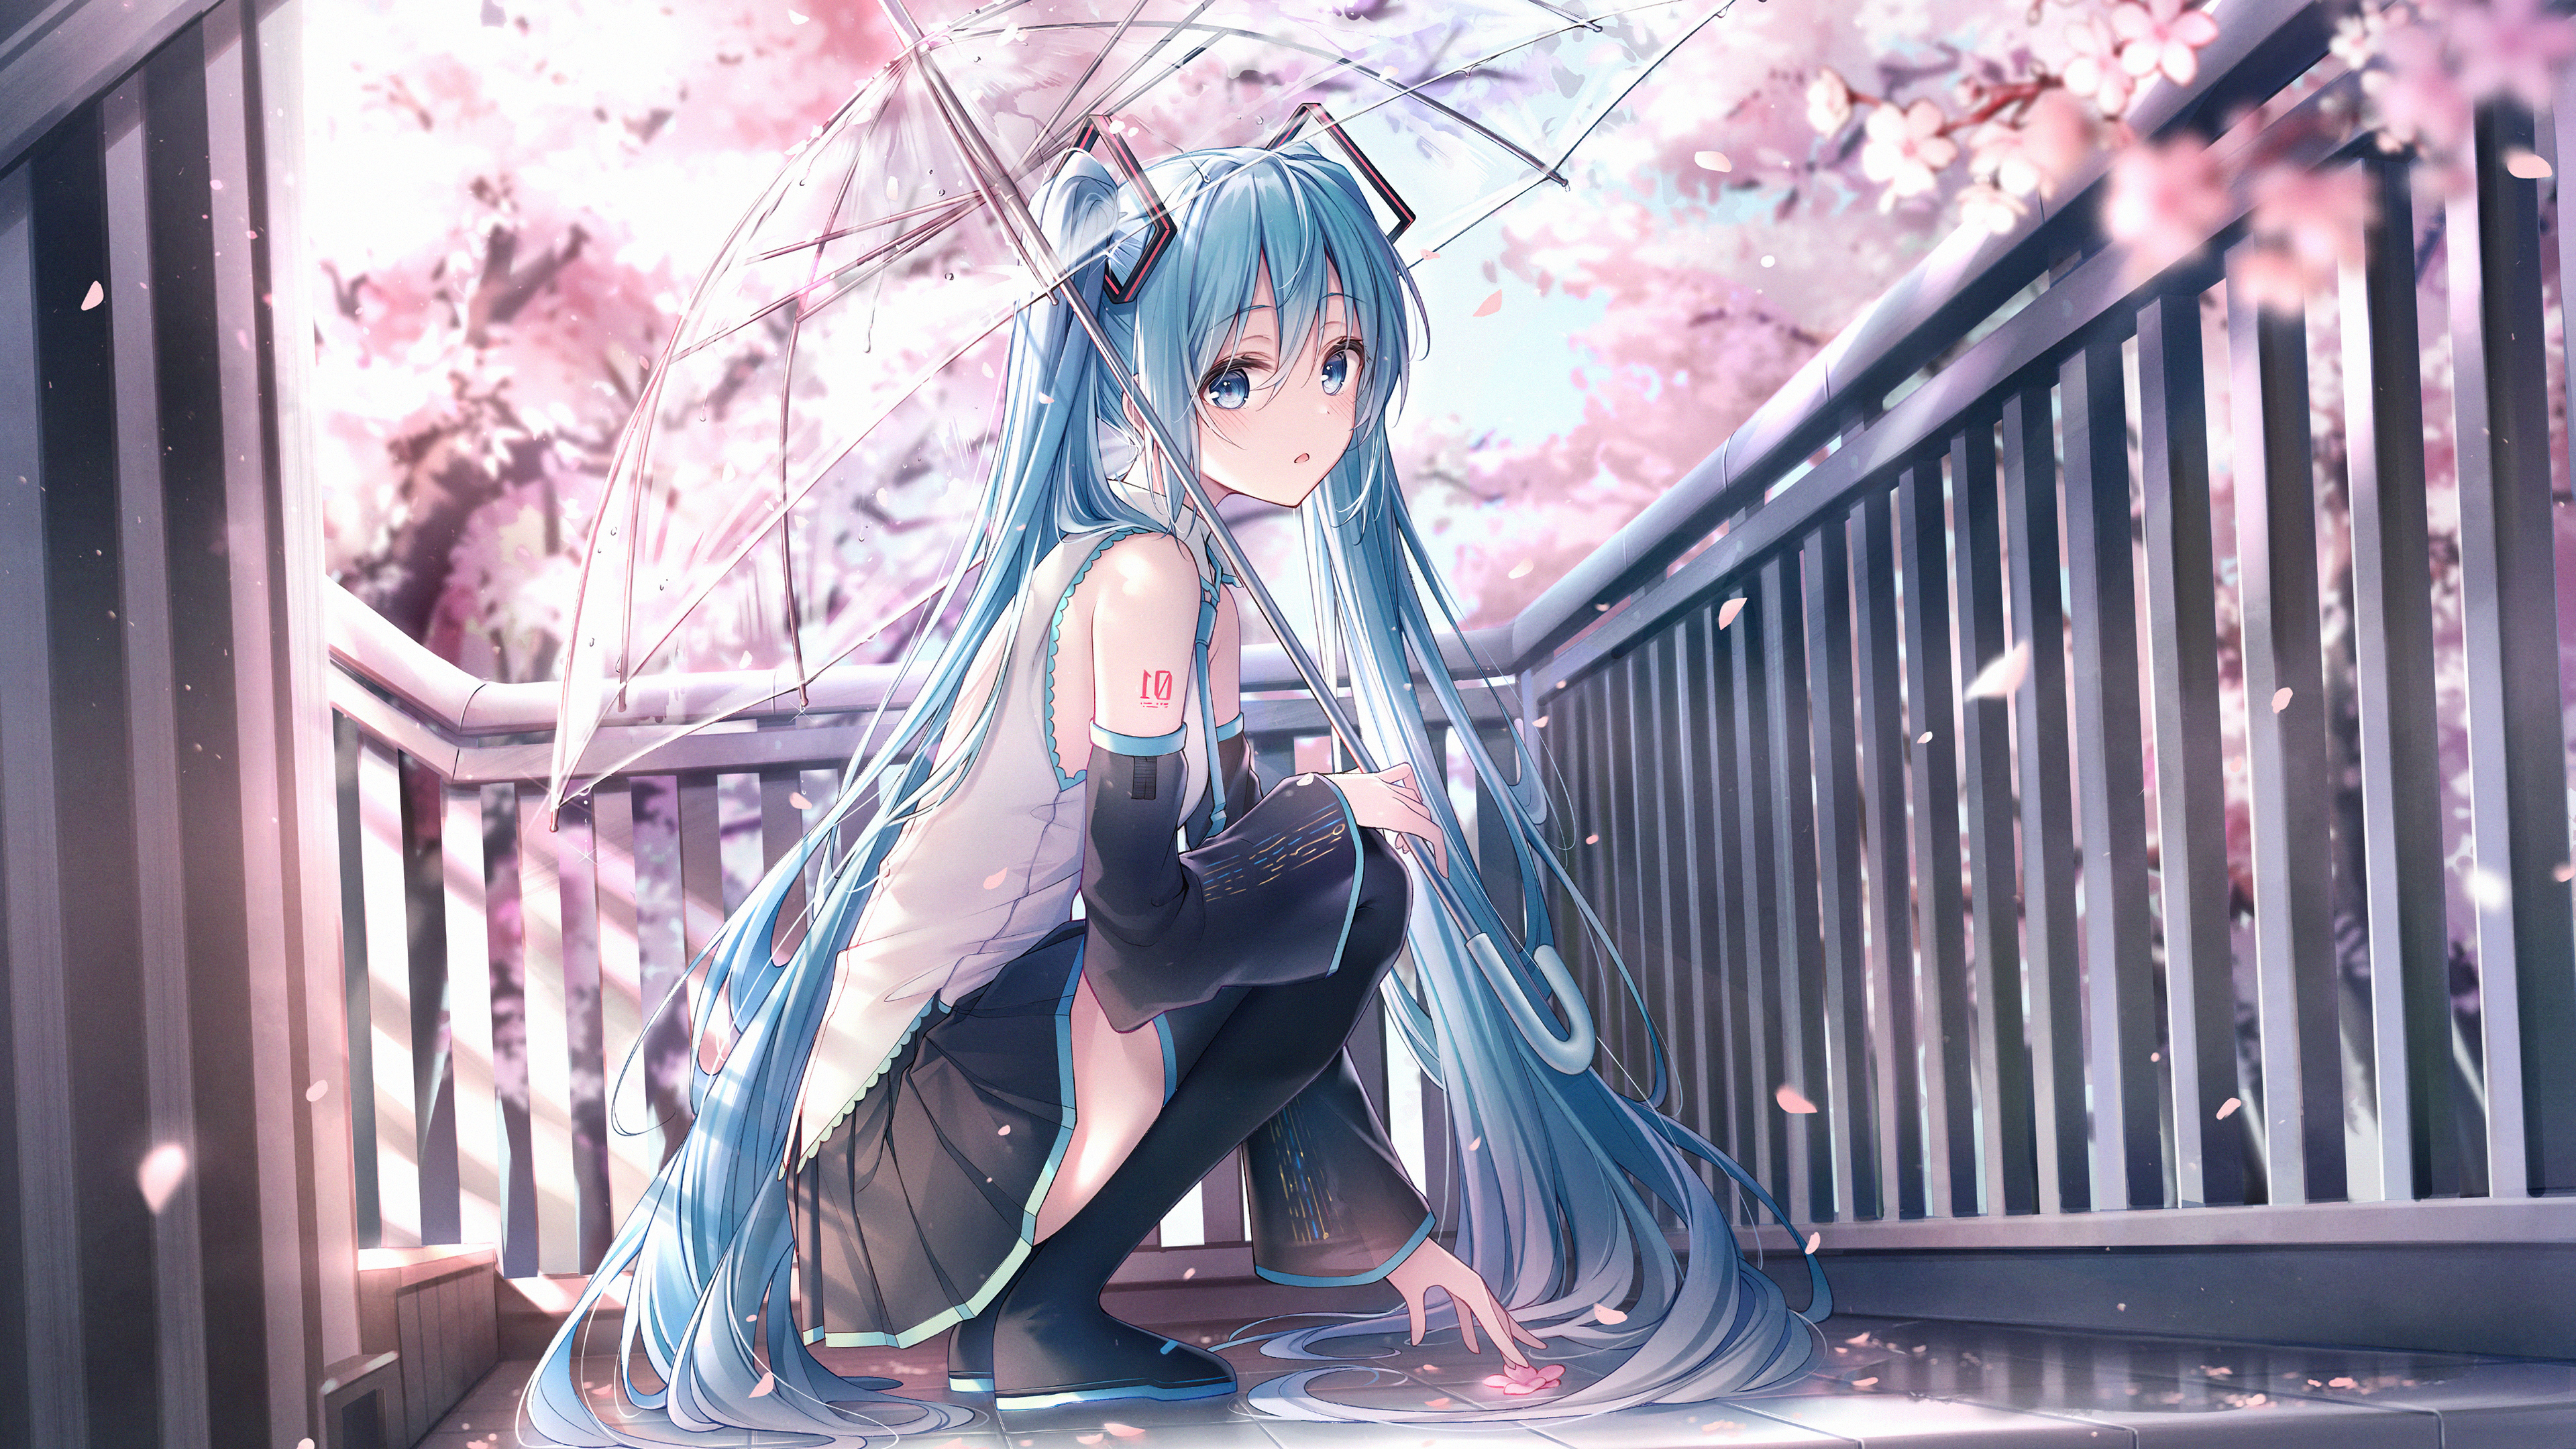 A long haired anime girl with blue hair and a black dress sits on the ground with a white umbrella. - Aqua